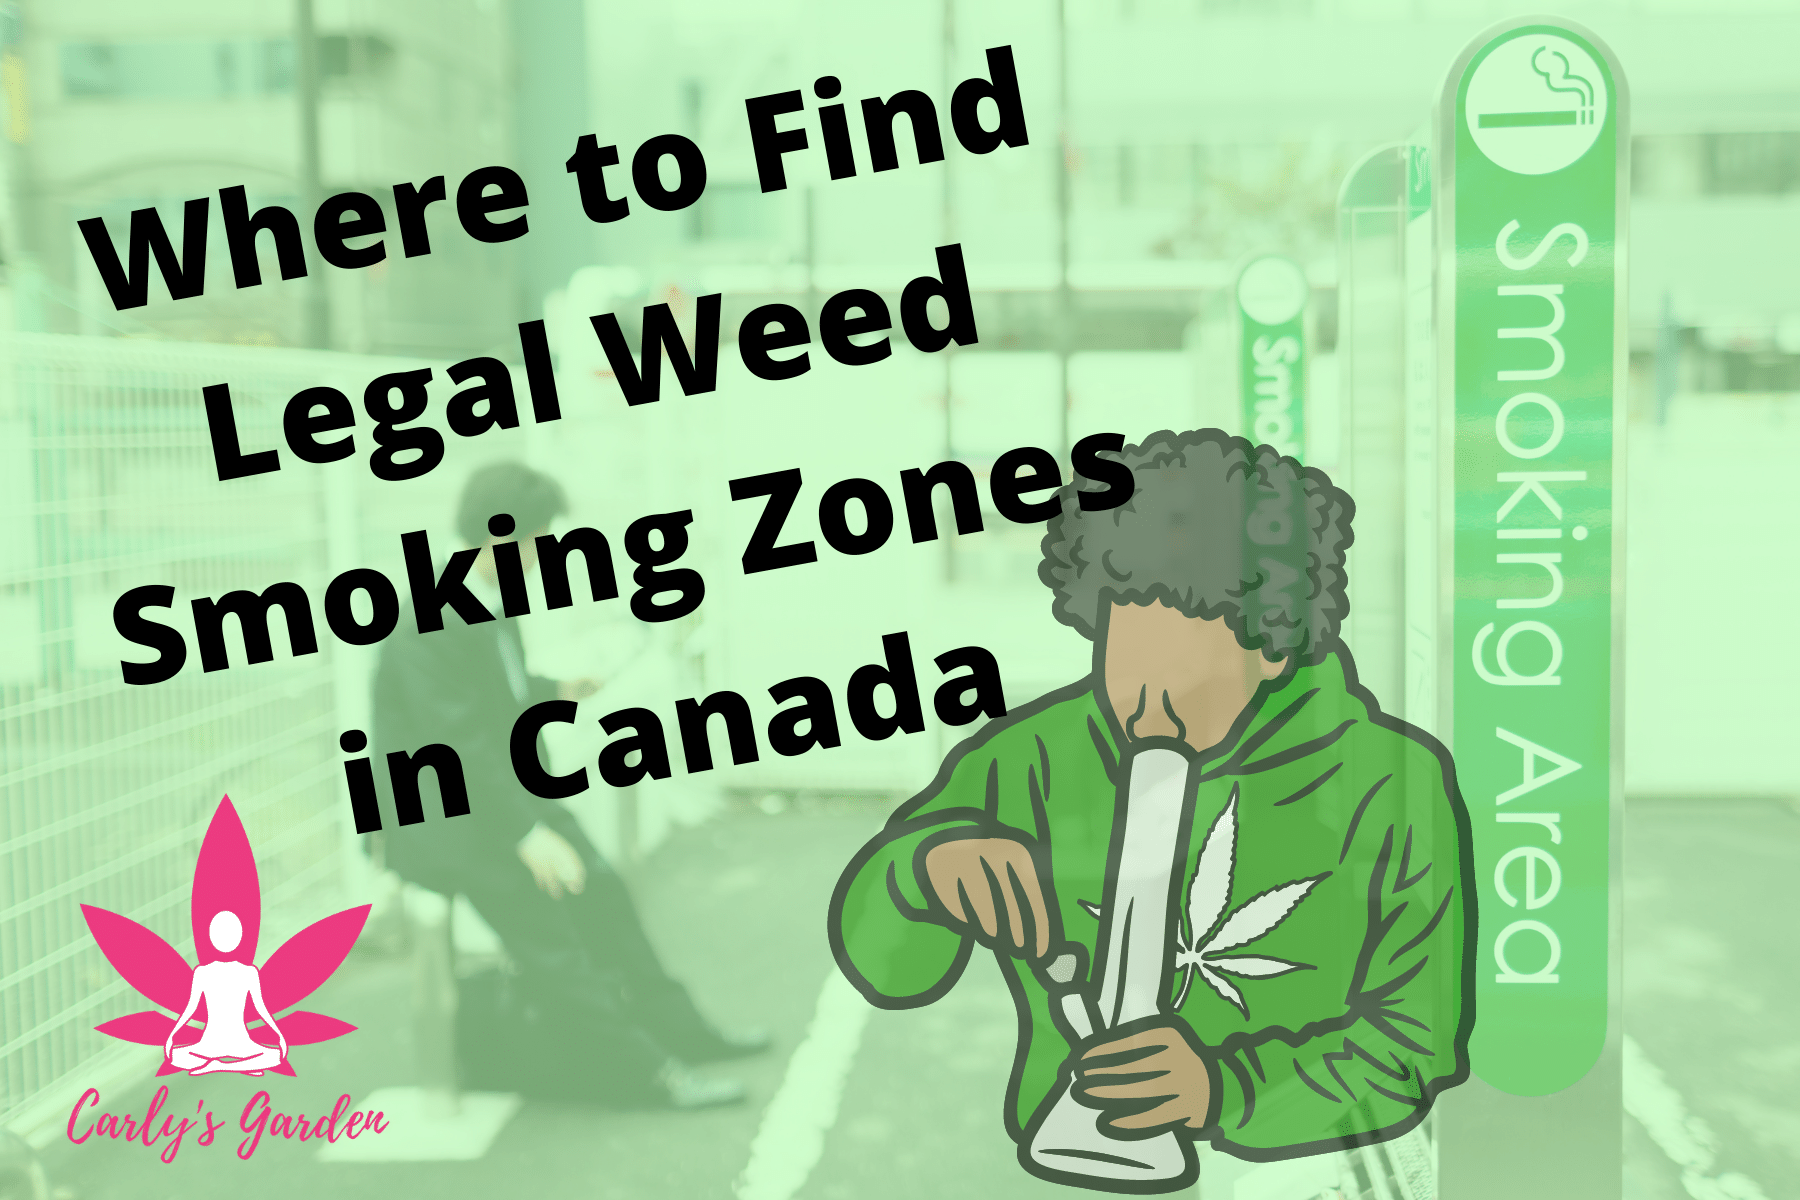 Where to Find Legal Weed Smoking Zones in Canada